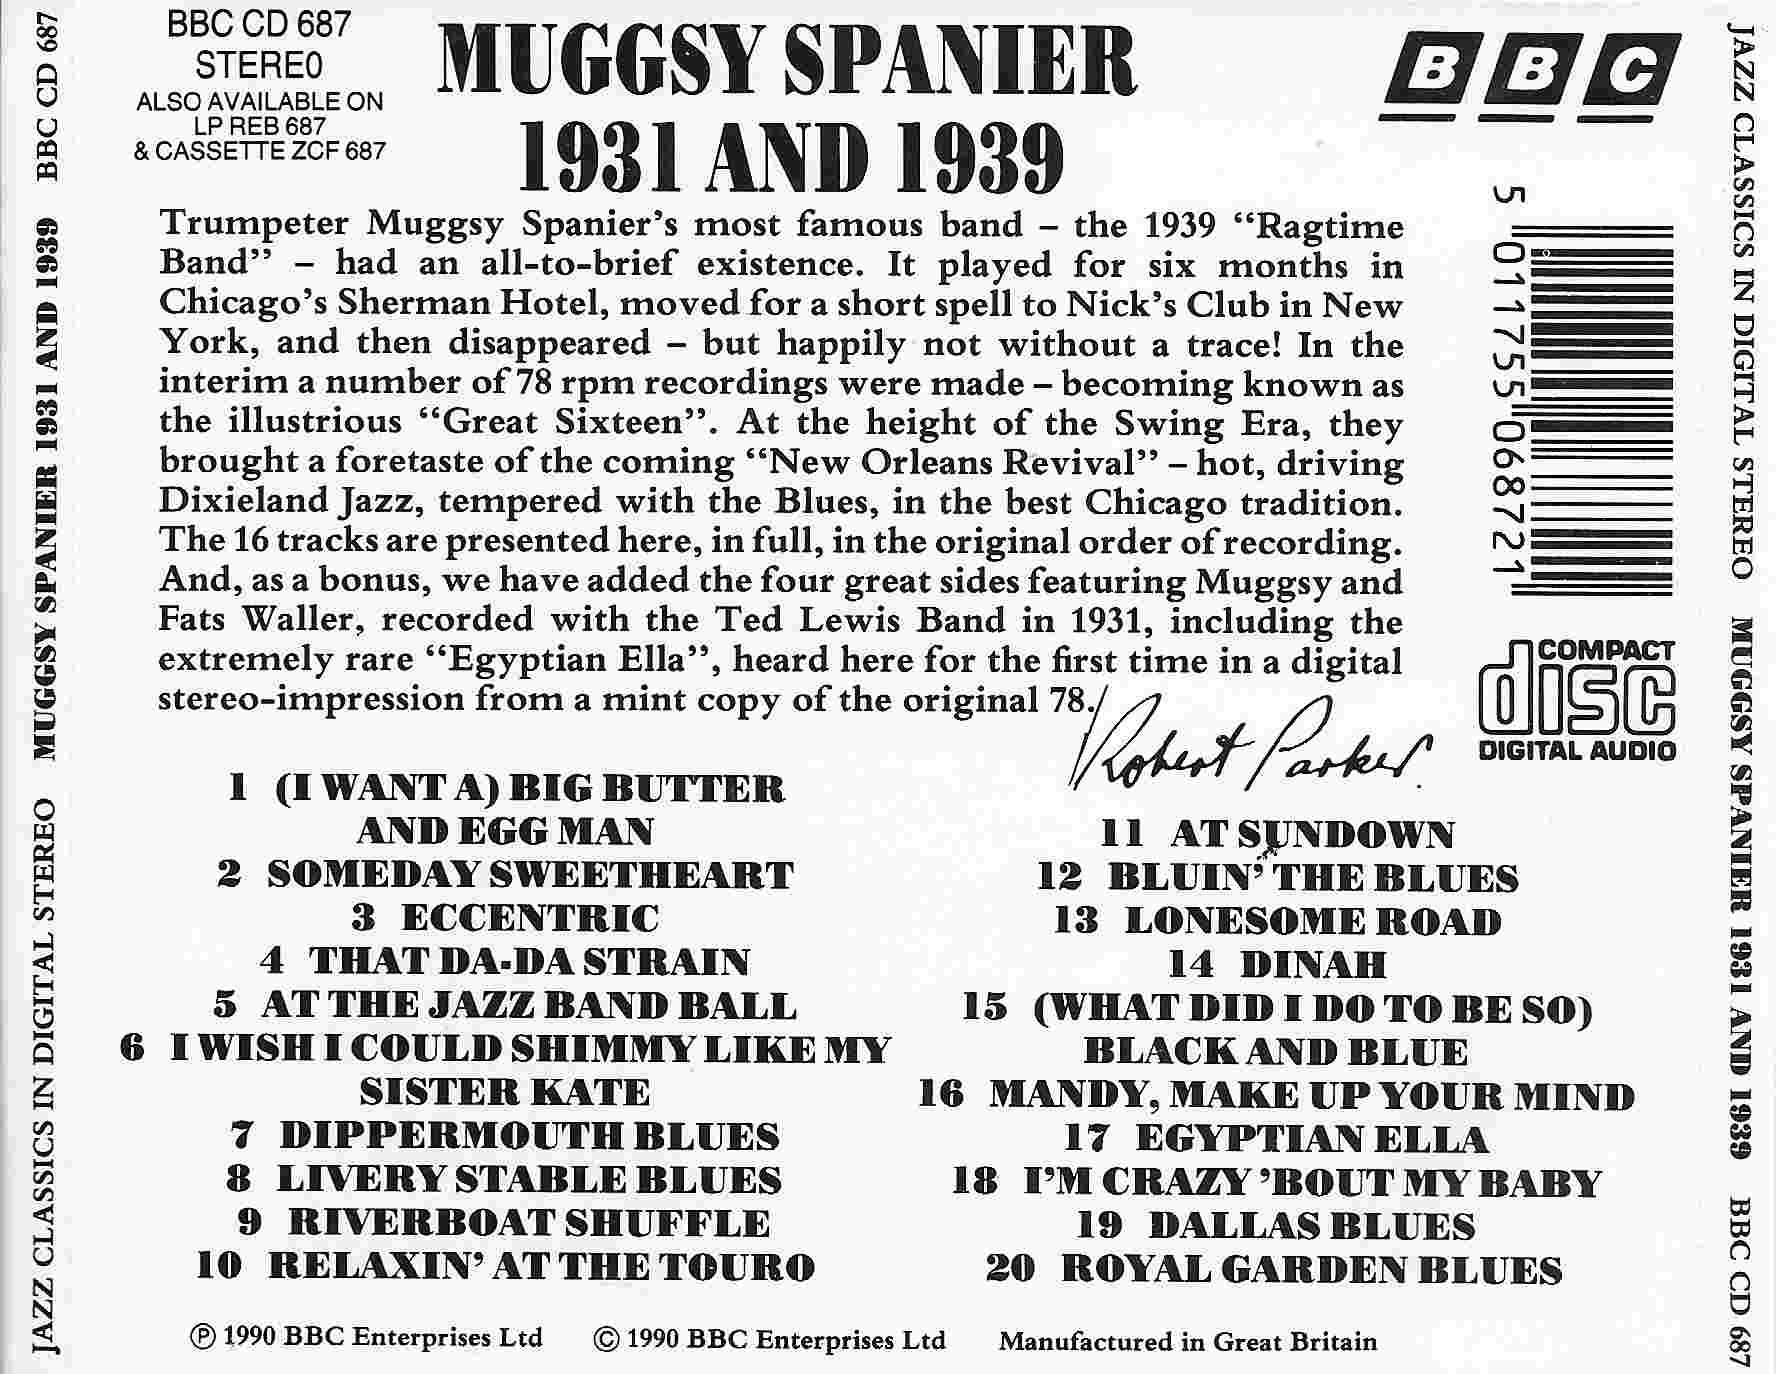 Picture of BBCCD687 Jazz classics - Muggsy Spanier by artist Muggsy Spanier from the BBC records and Tapes library